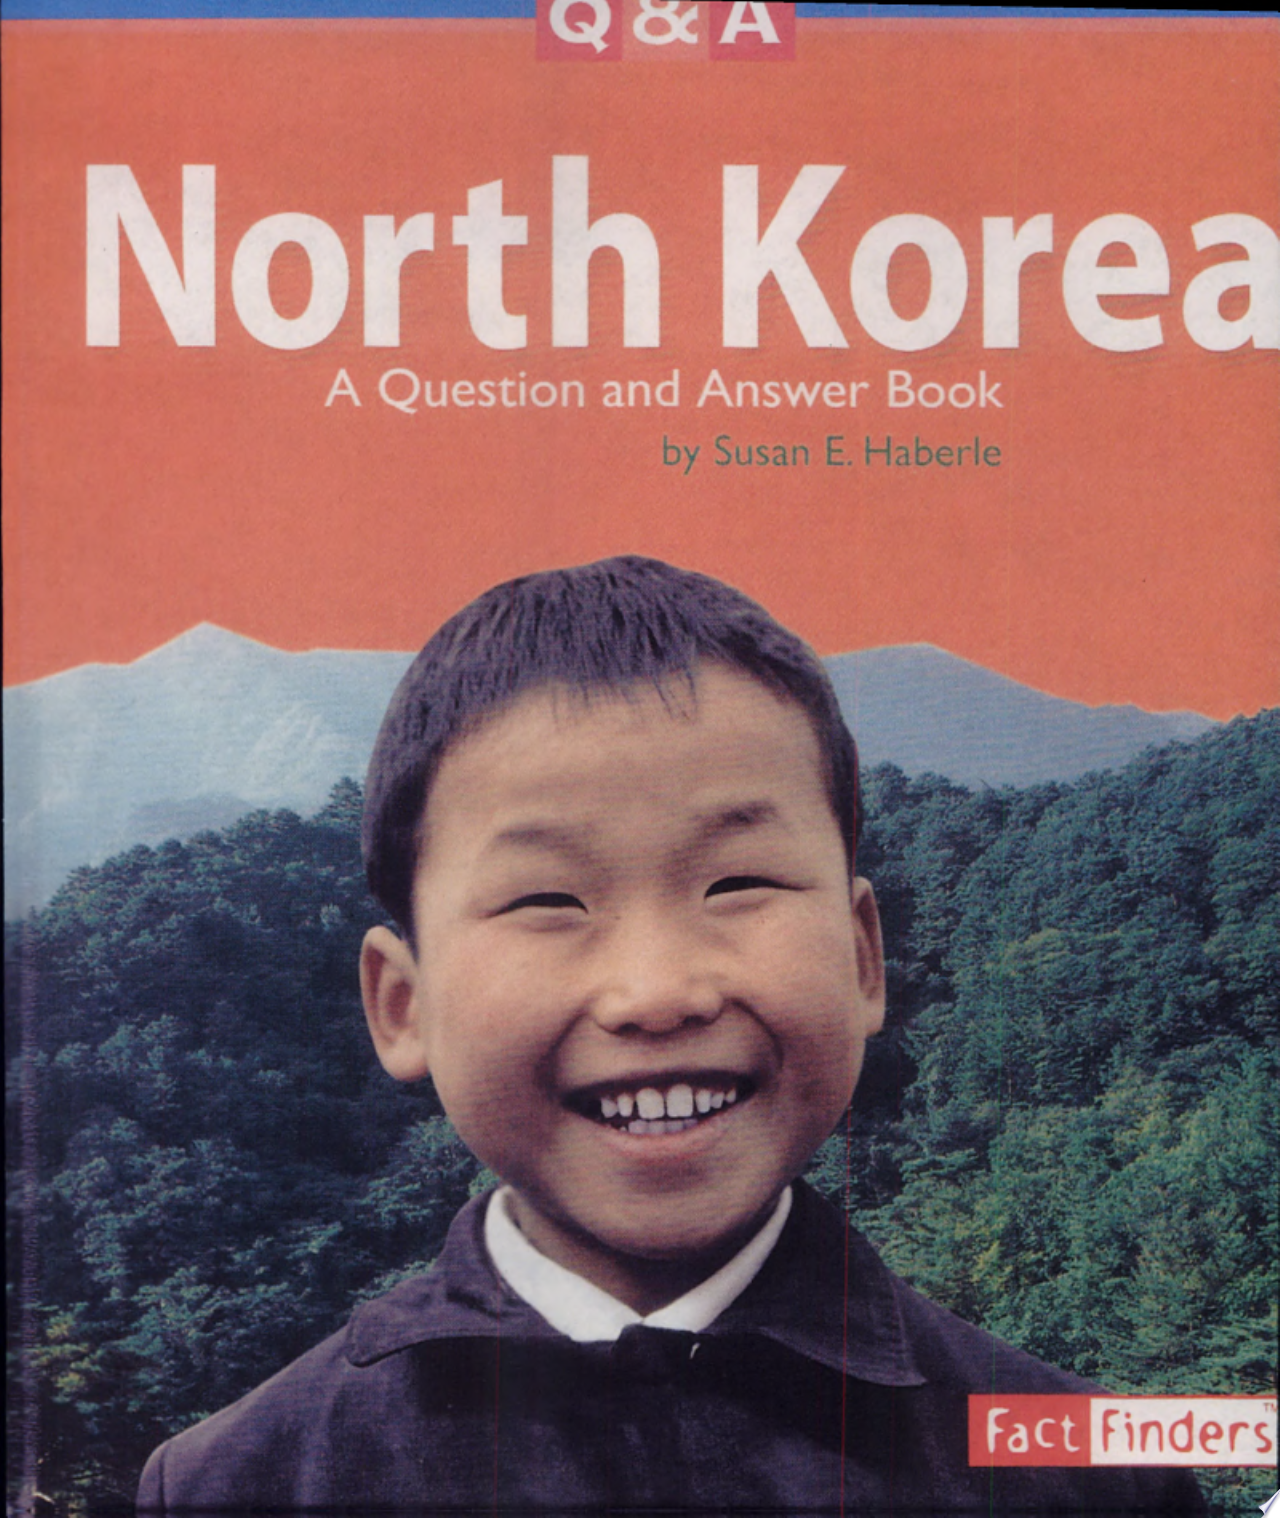 Image for "North Korea: a question and answer book"